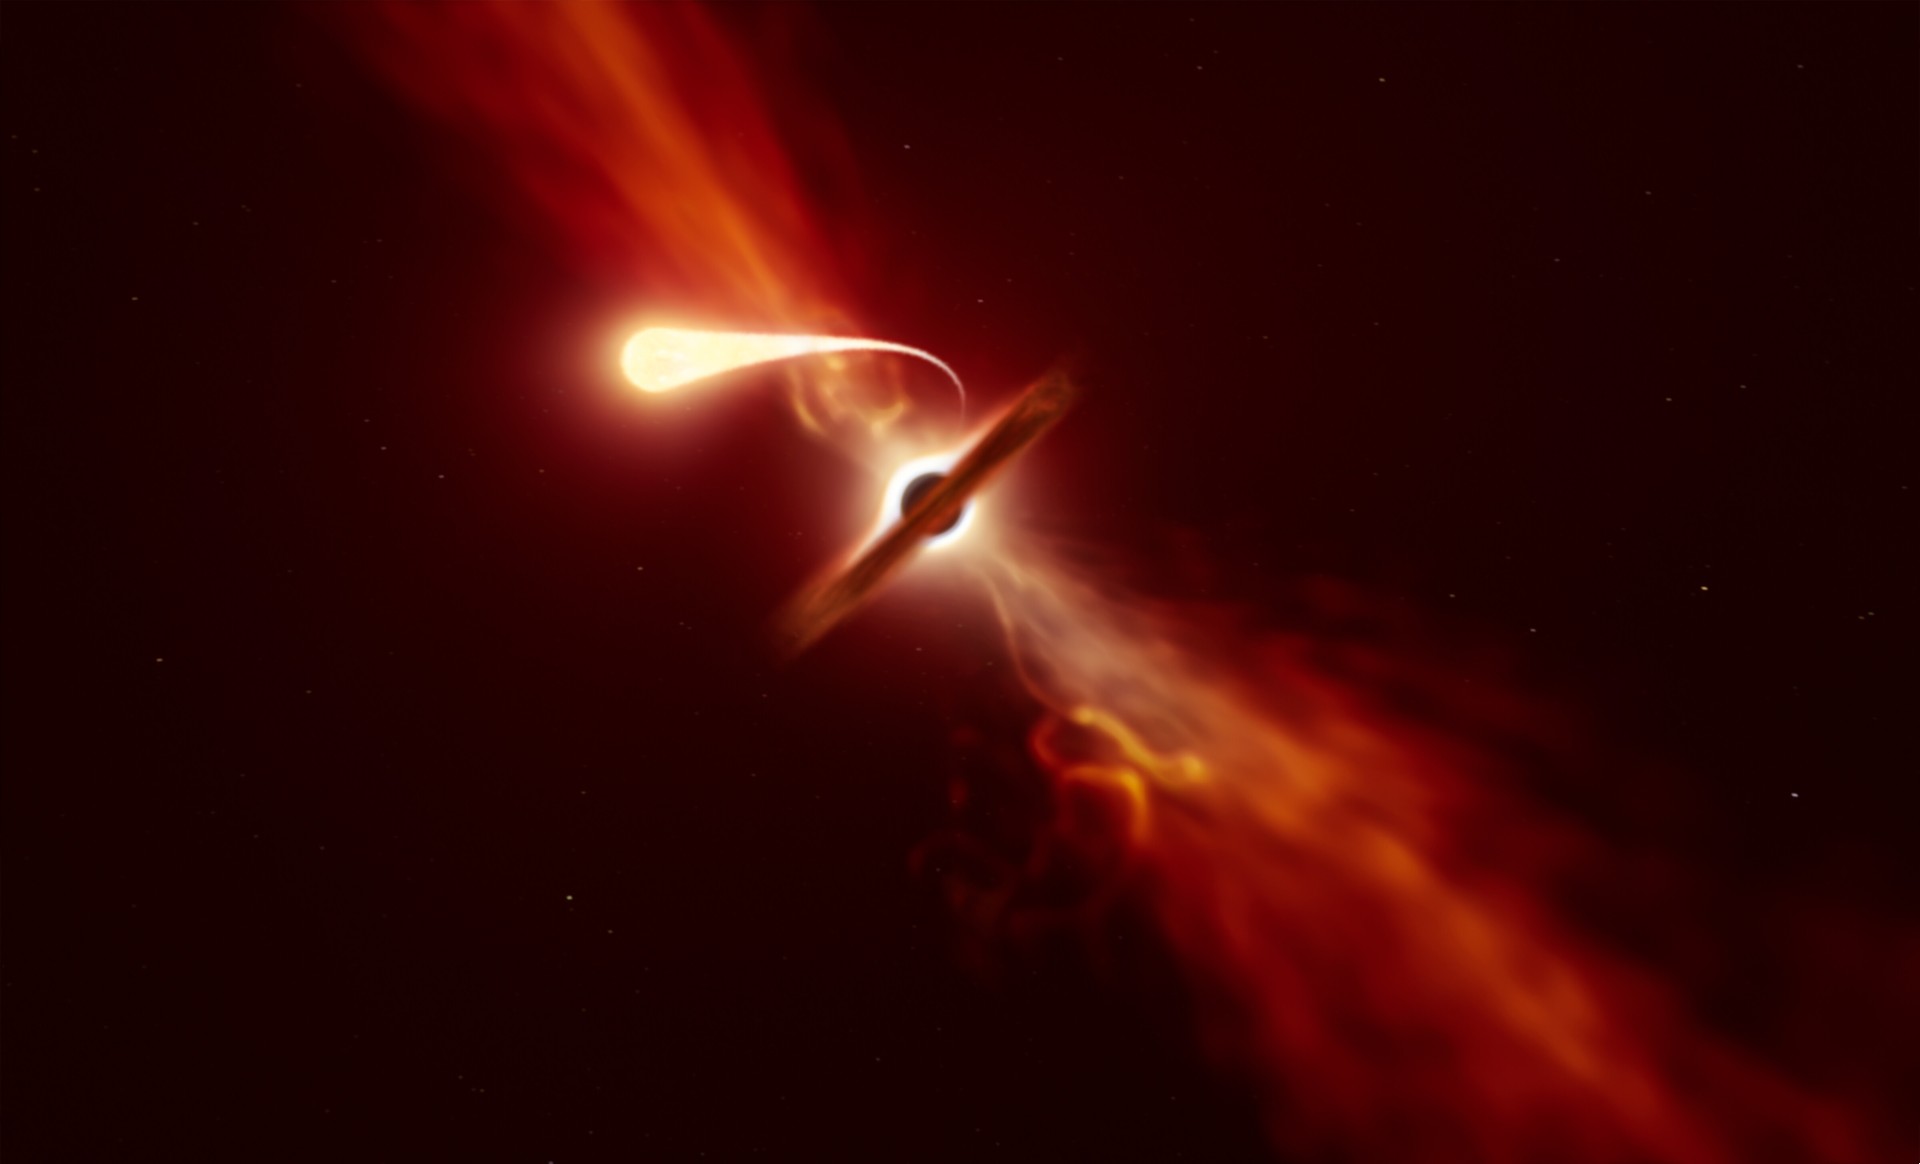 Mysteriously bright flash is a black hole jet pointing straight toward Earth, astronomers say - University of Birmingham